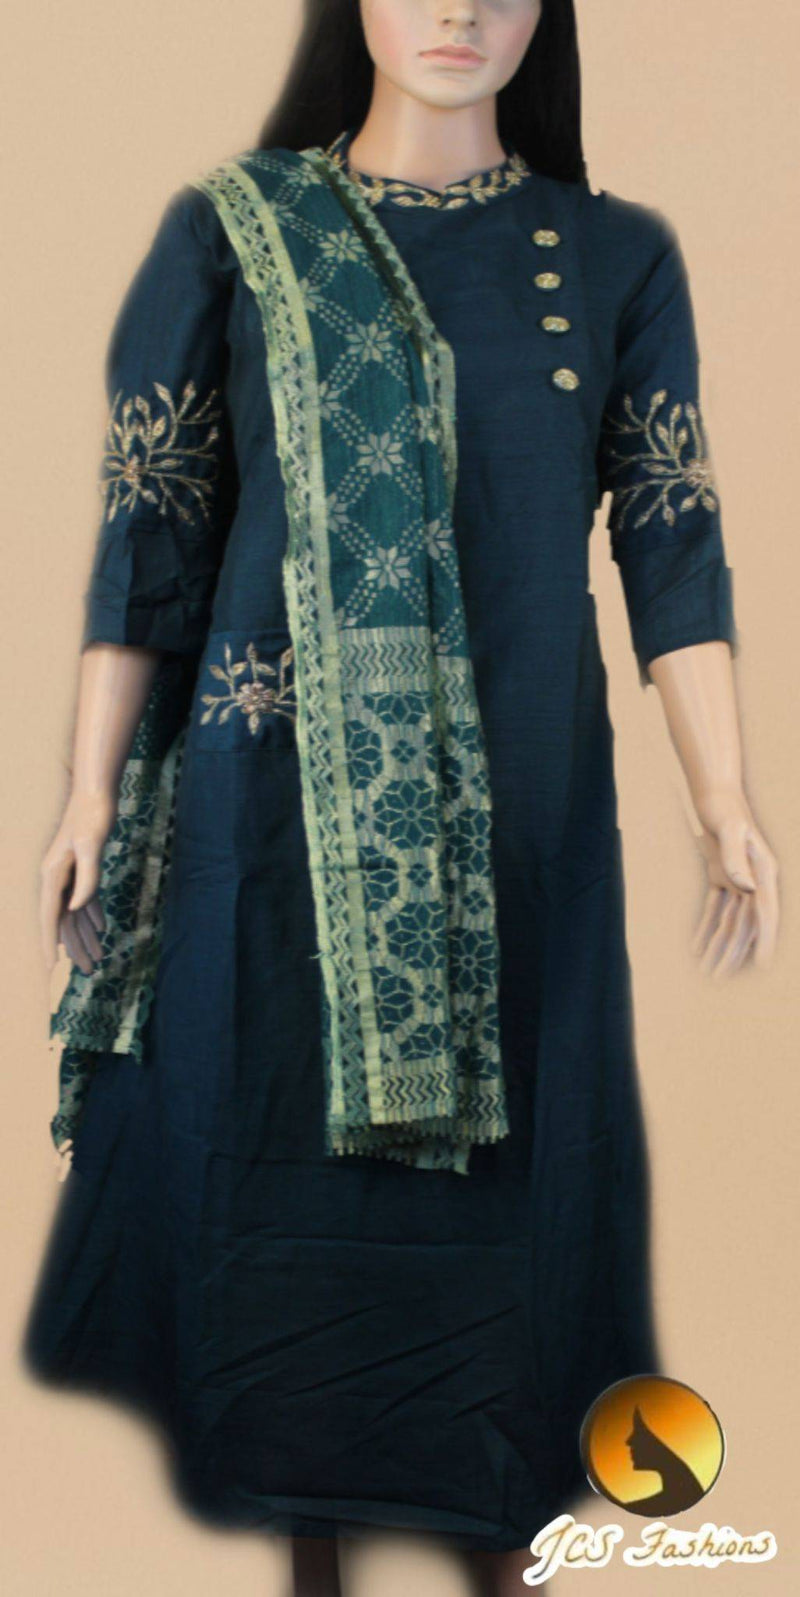 Dola Silk Floor-Length Gown with Hand Embroidery and Fancy Dupatta